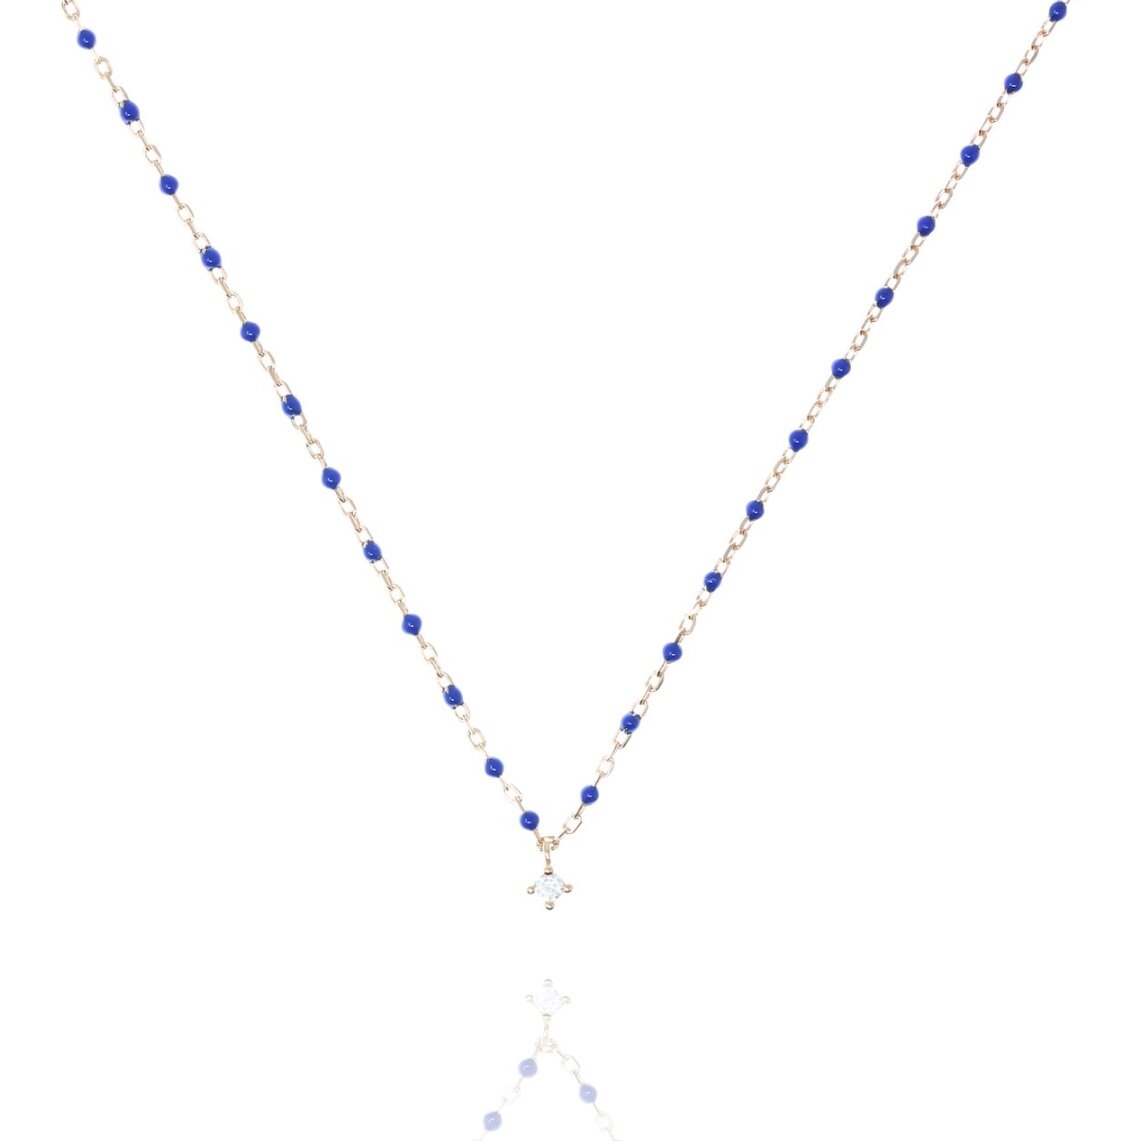 Silver Chain and Bead Necklace - Blue